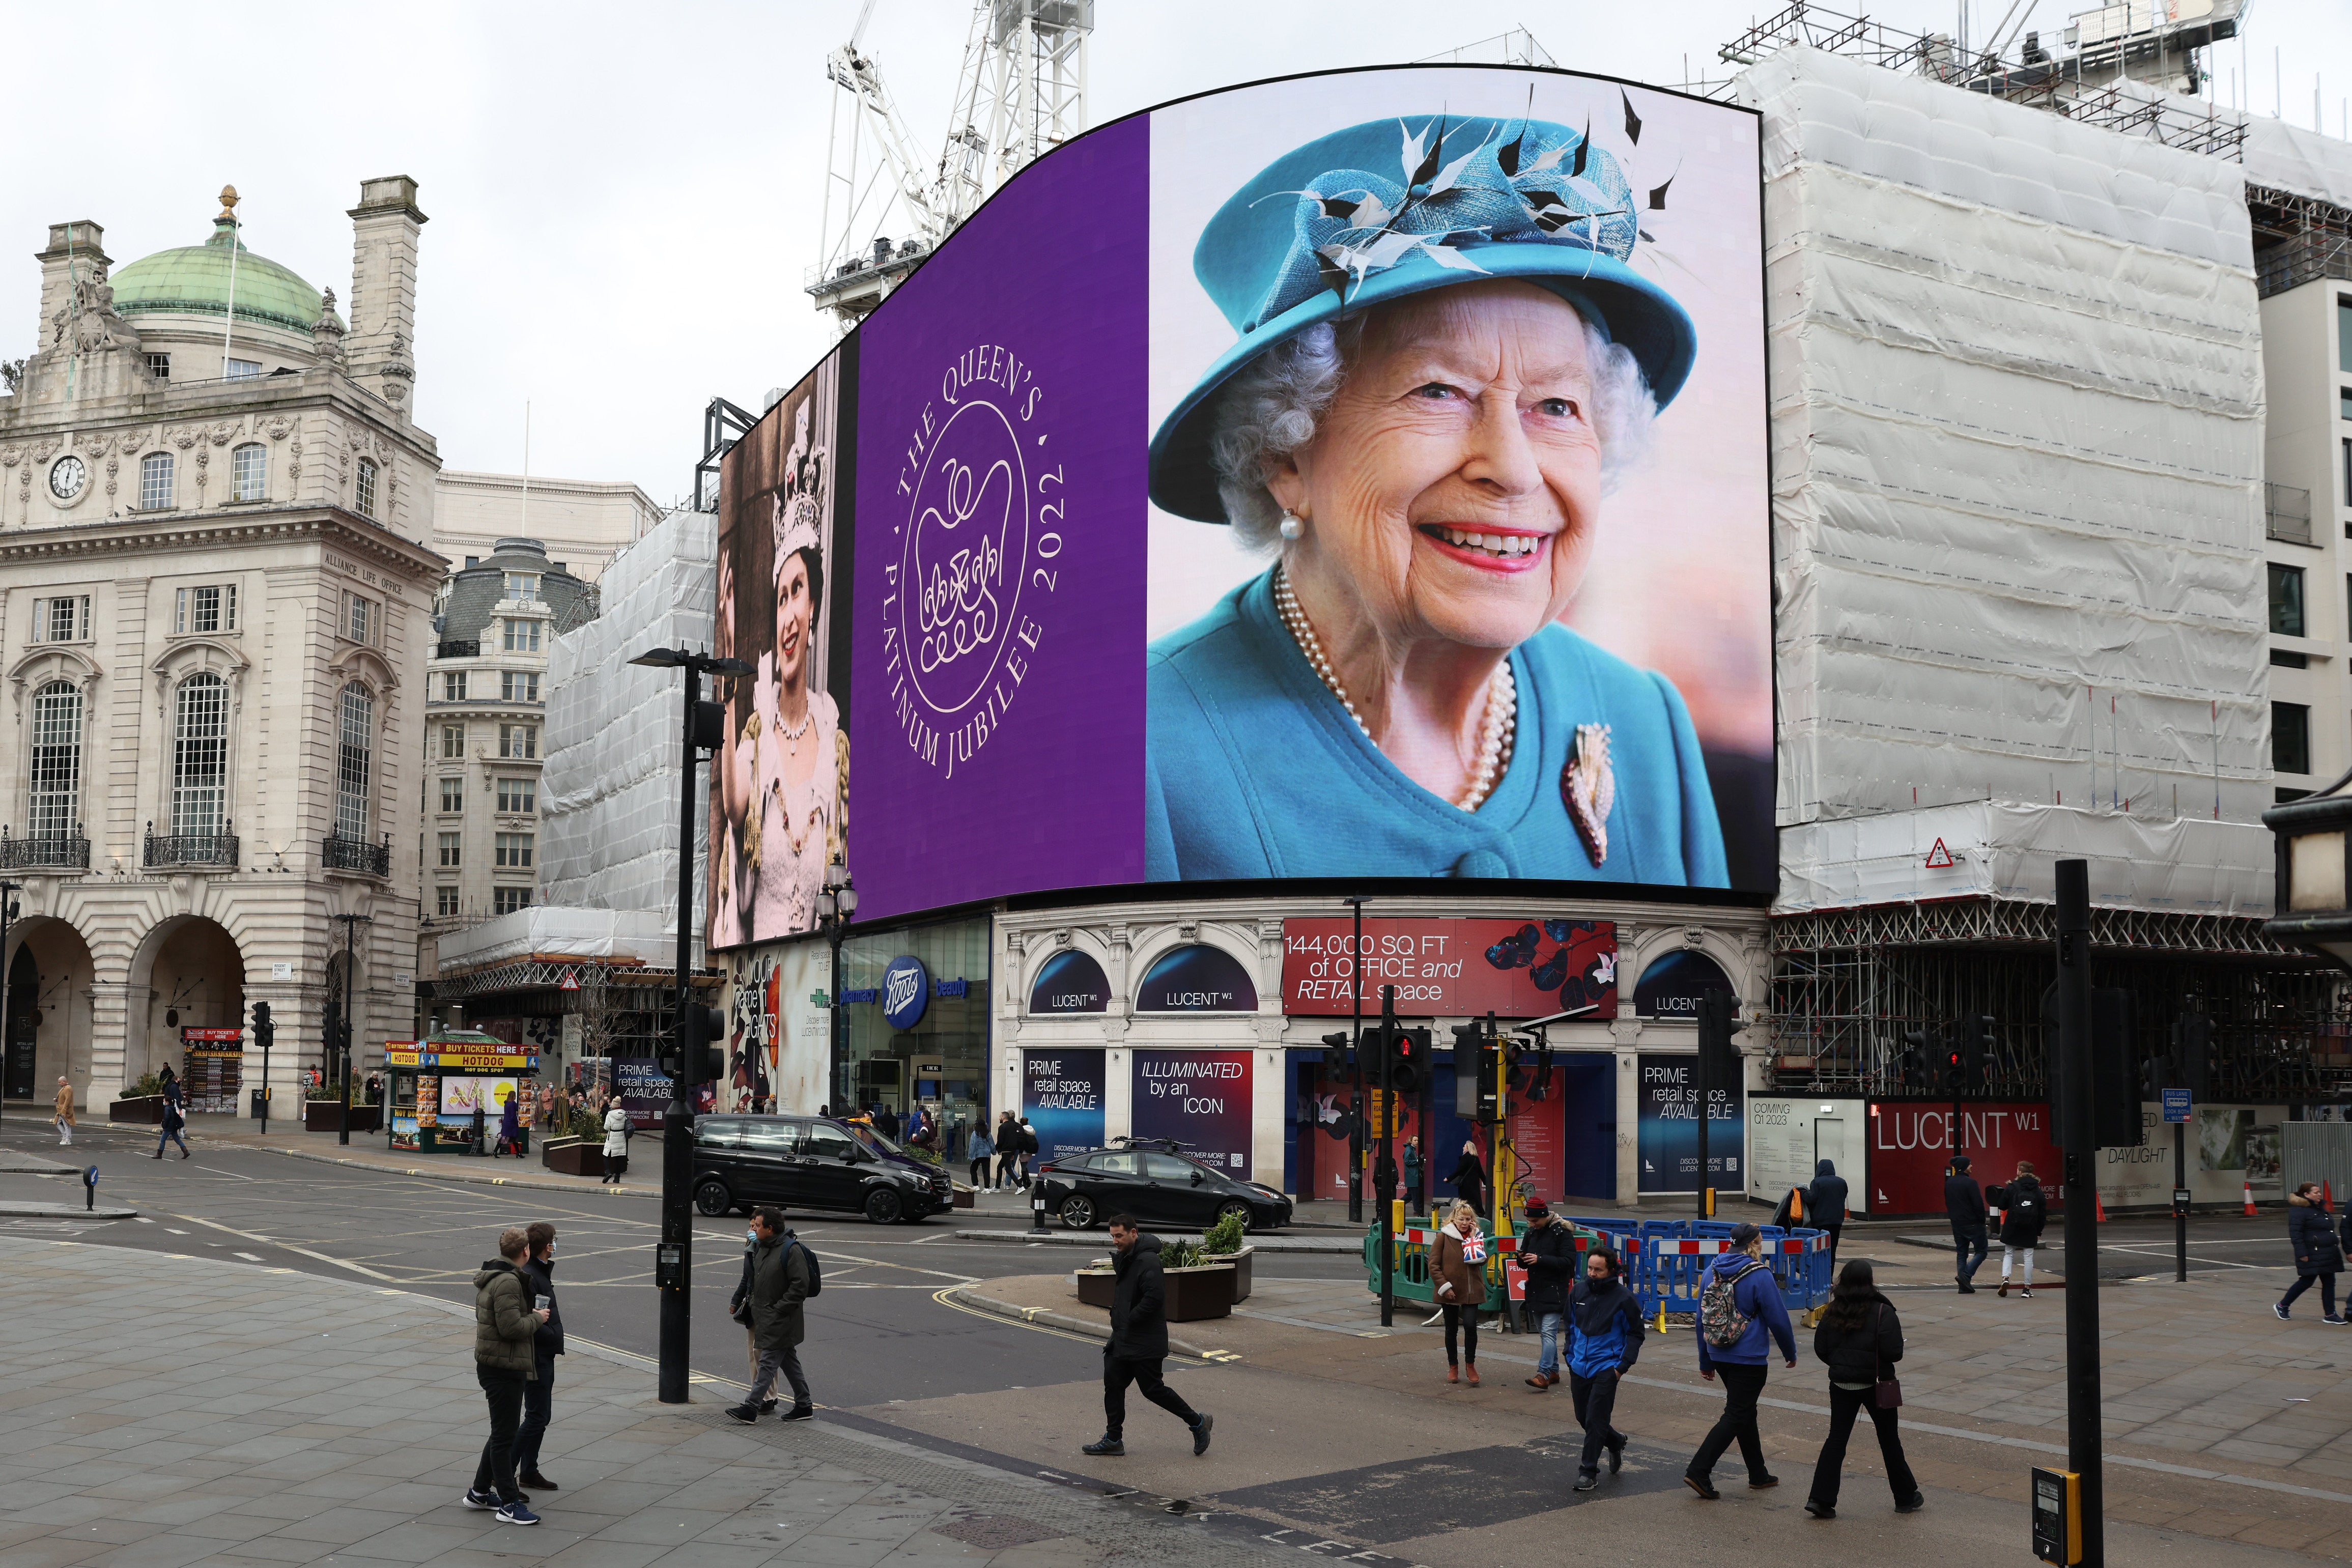 The Queen’s funeral will take place on Monday 19 September